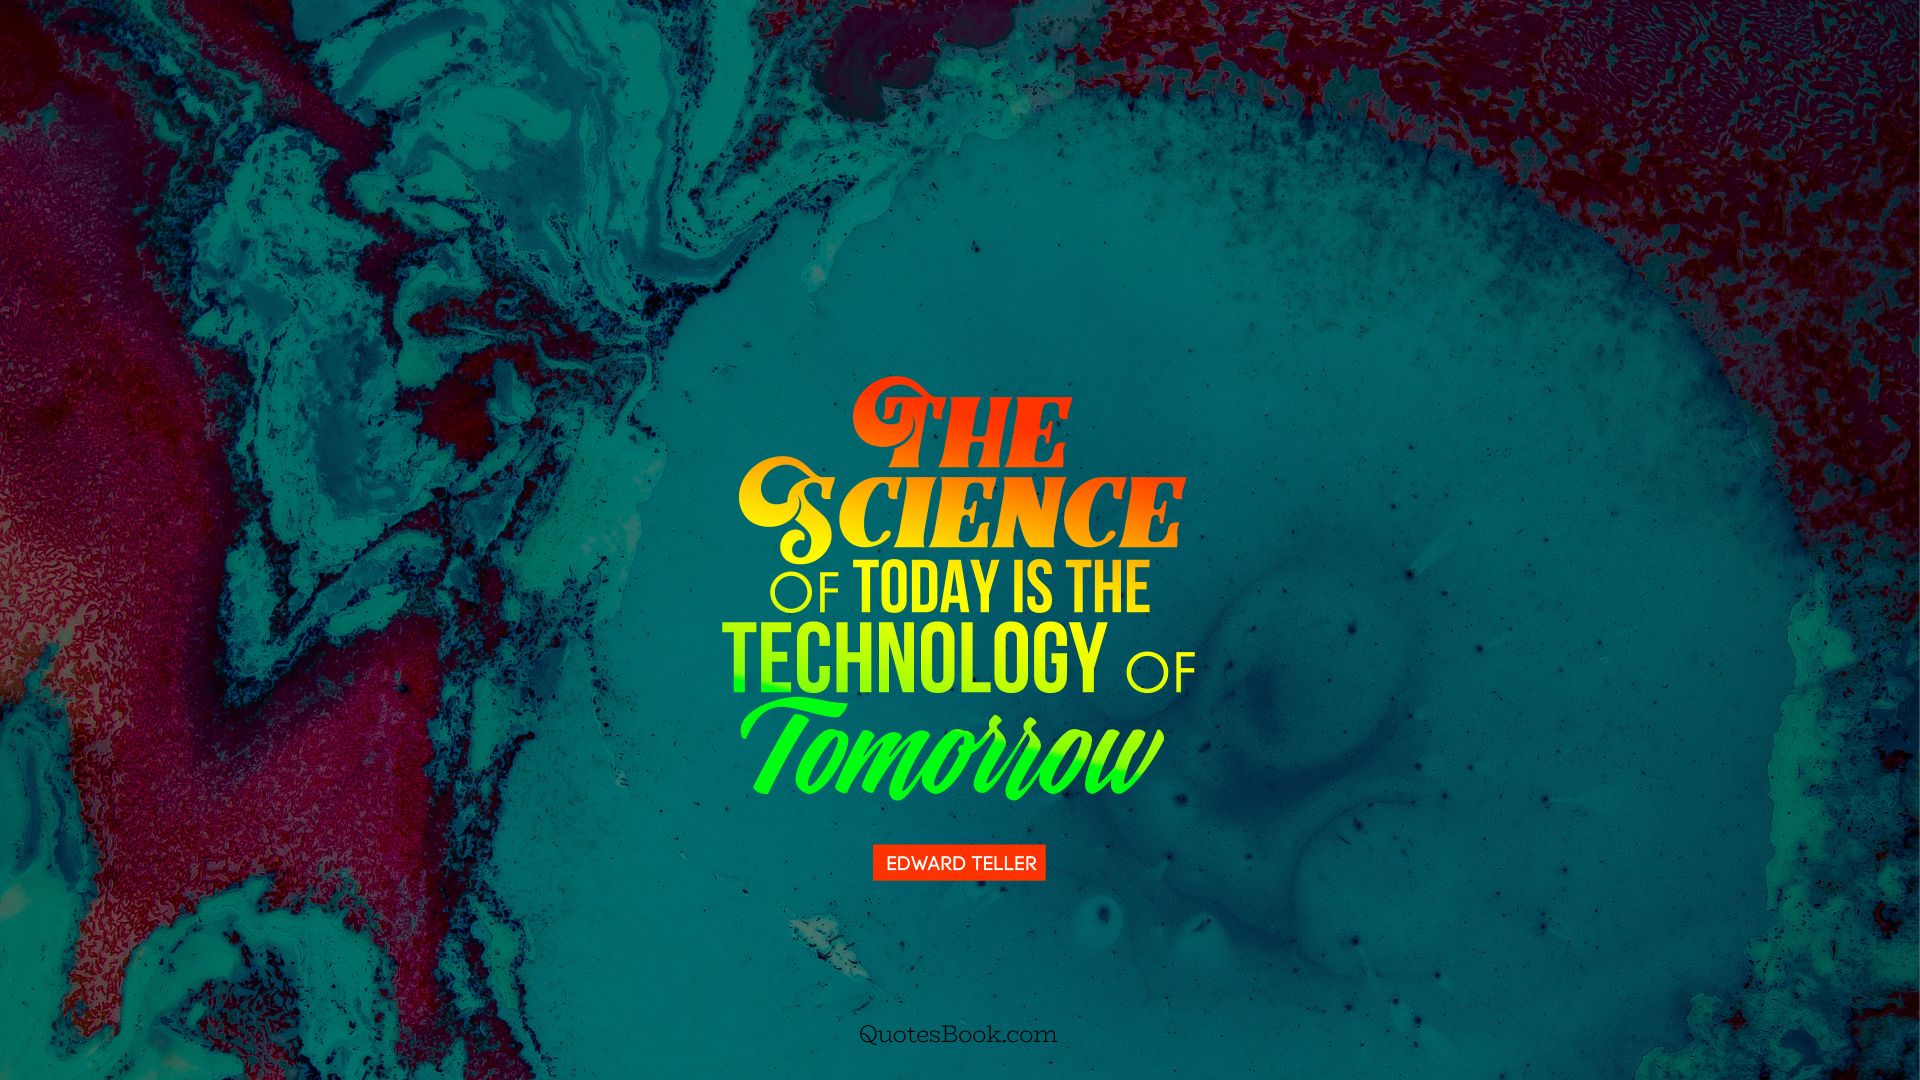 The science of today is the technology of tomorrow. - Quote by Edward Teller